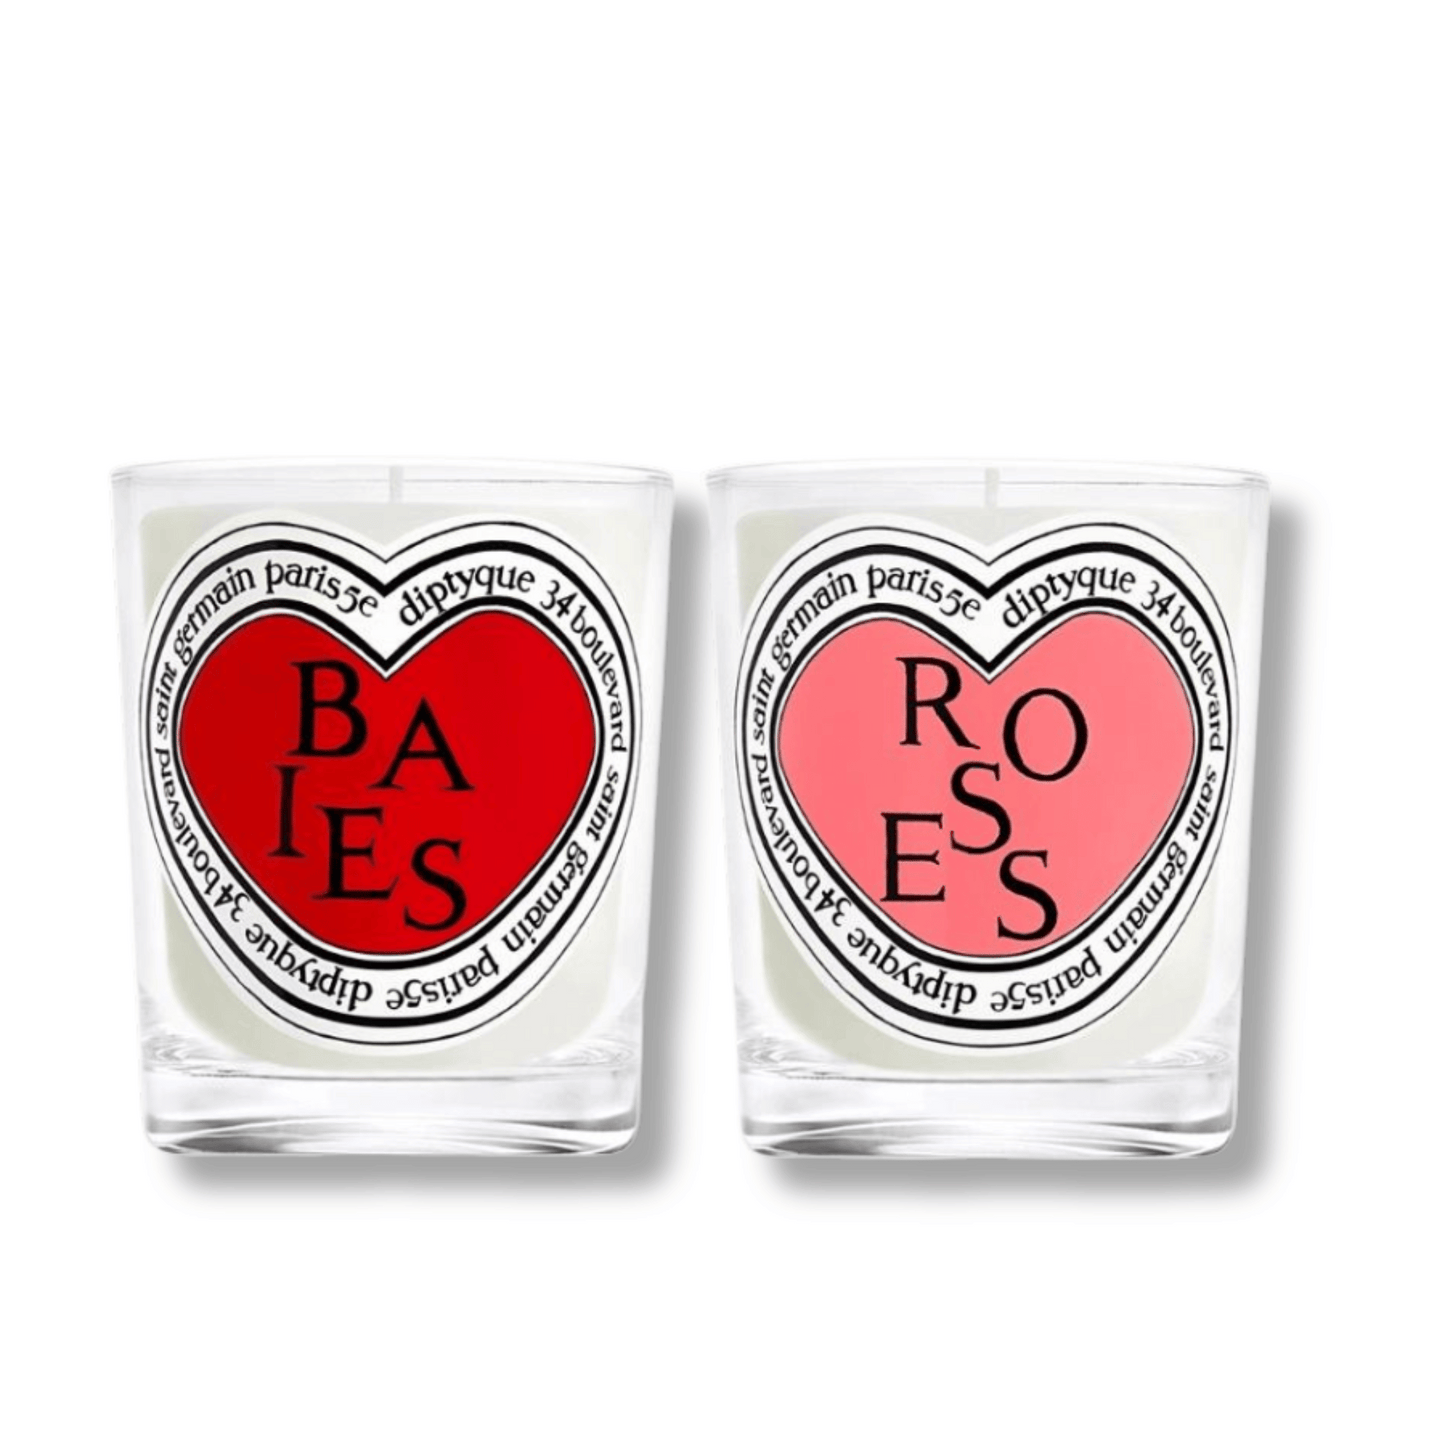 Alternate Image of Valentine's Duo - Baies and Roses Candle Set